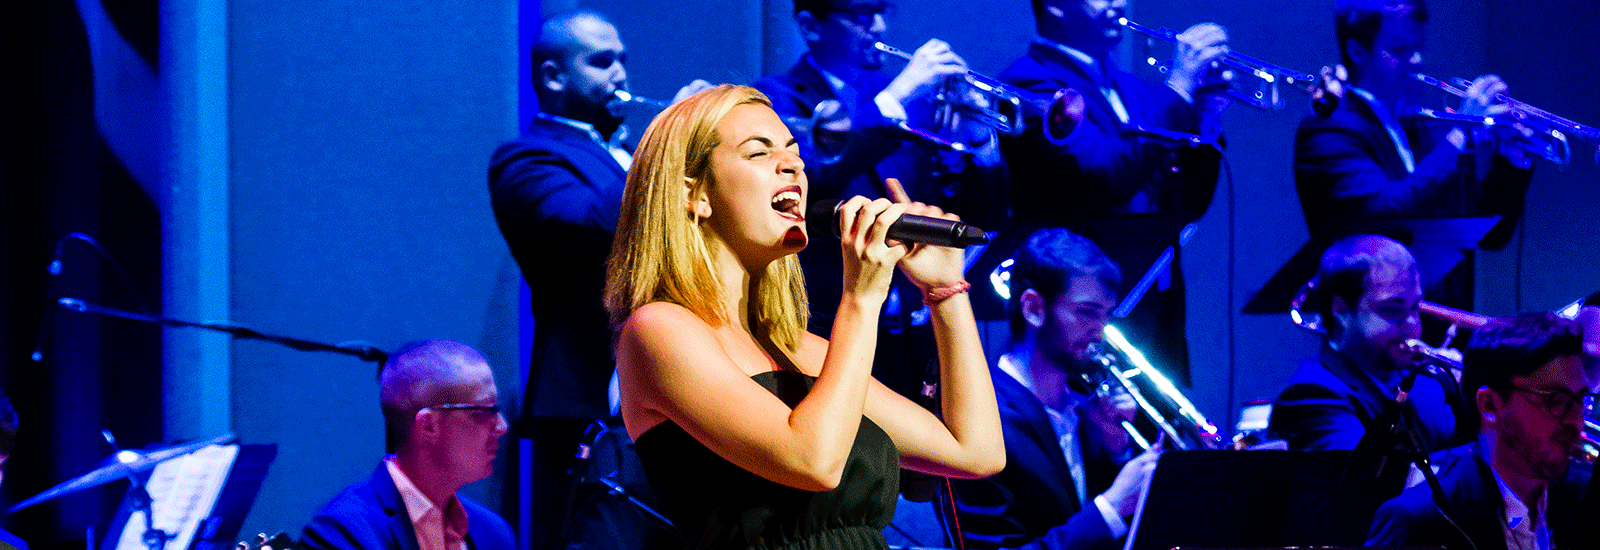 Jazz Vocalist Performing on Stage